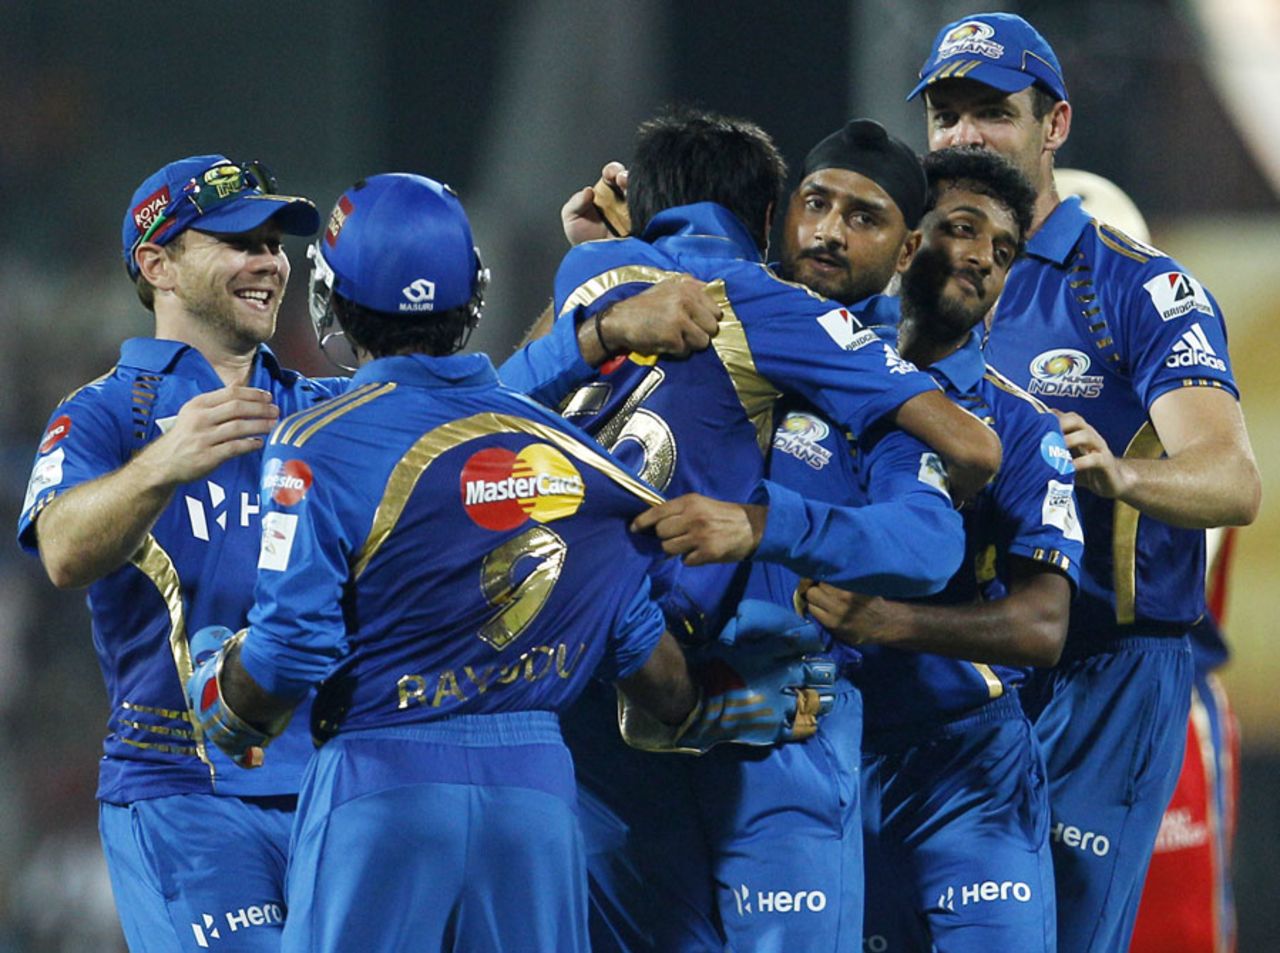 Mumbai Indians are delighted to get rid of Chris Gayle, Mumbai Indians v RCB, CLT20 final, Chennai, October 9, 2011